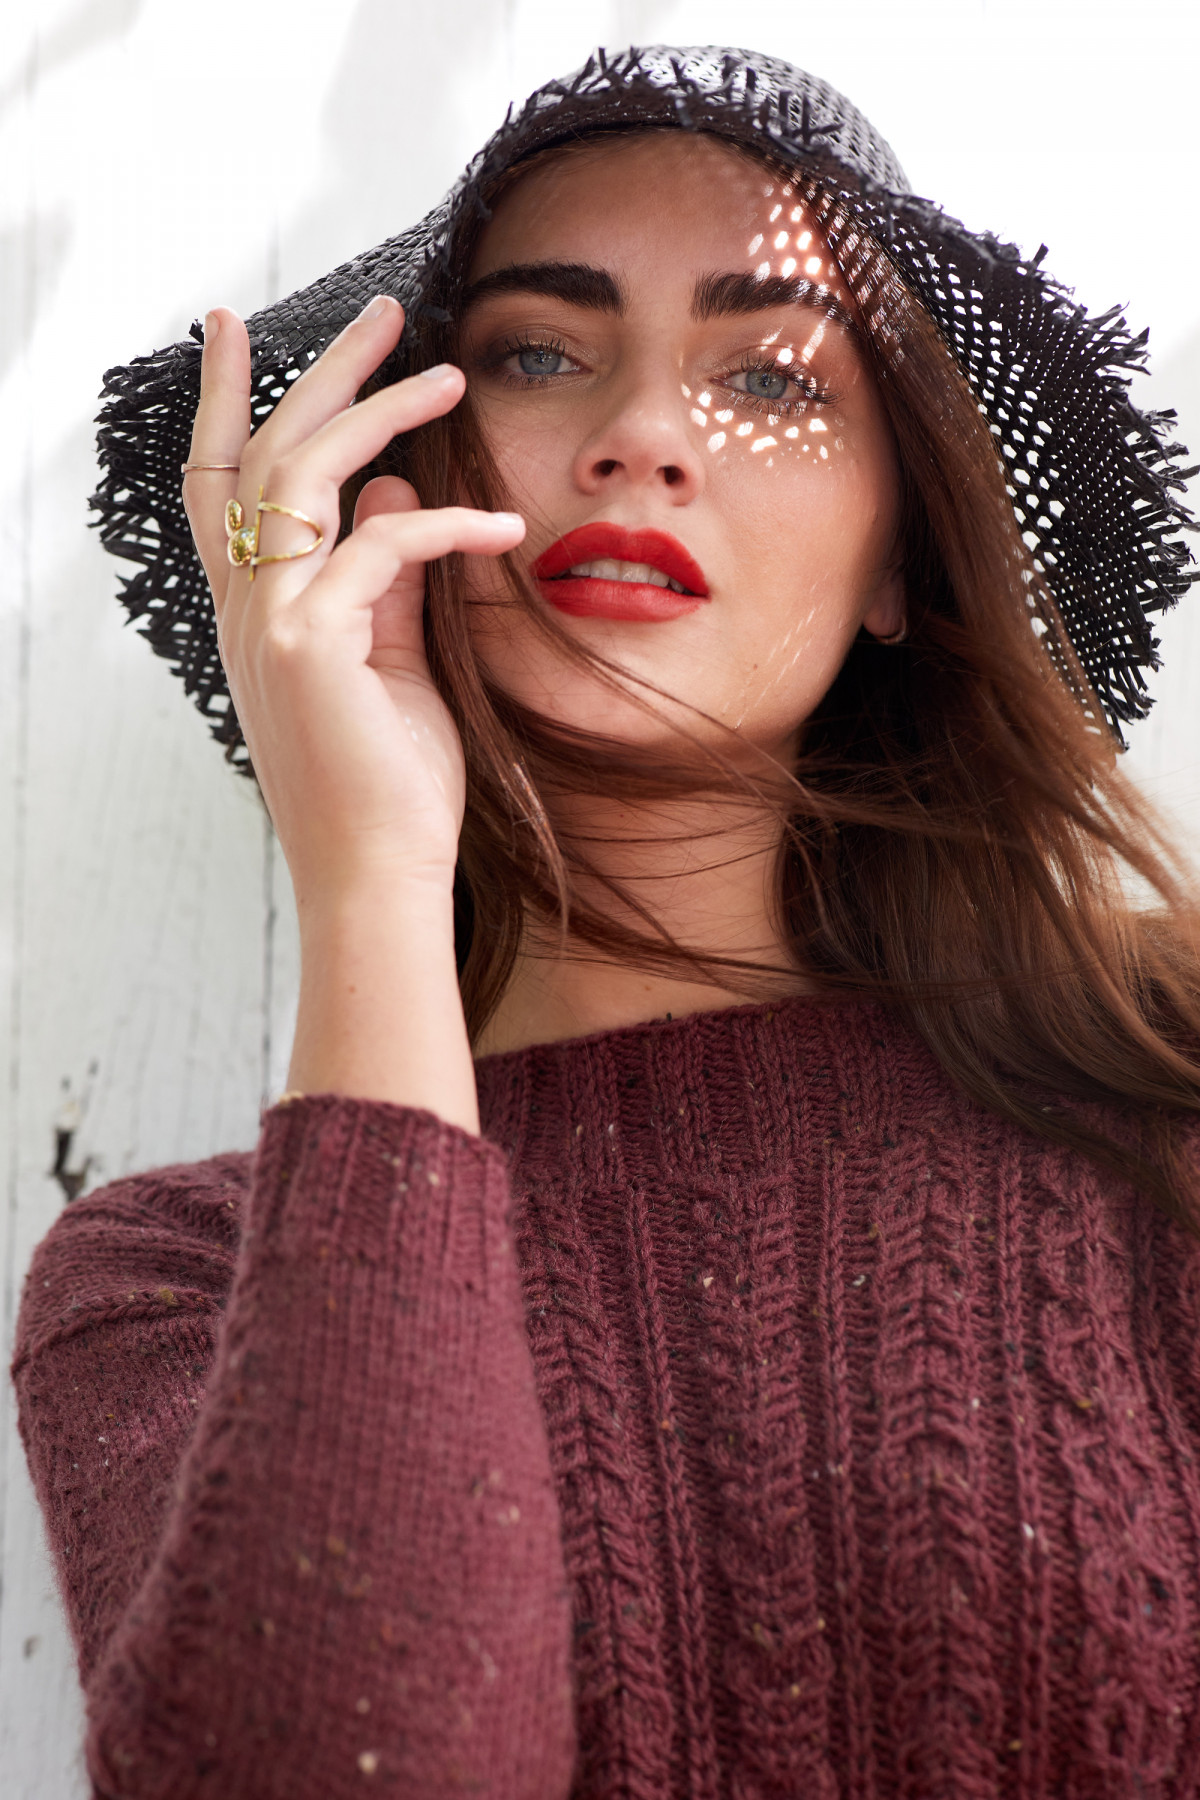 Editorial fashion photo of a female model with long dark hair wearing a straw hat and maroon knit sweater